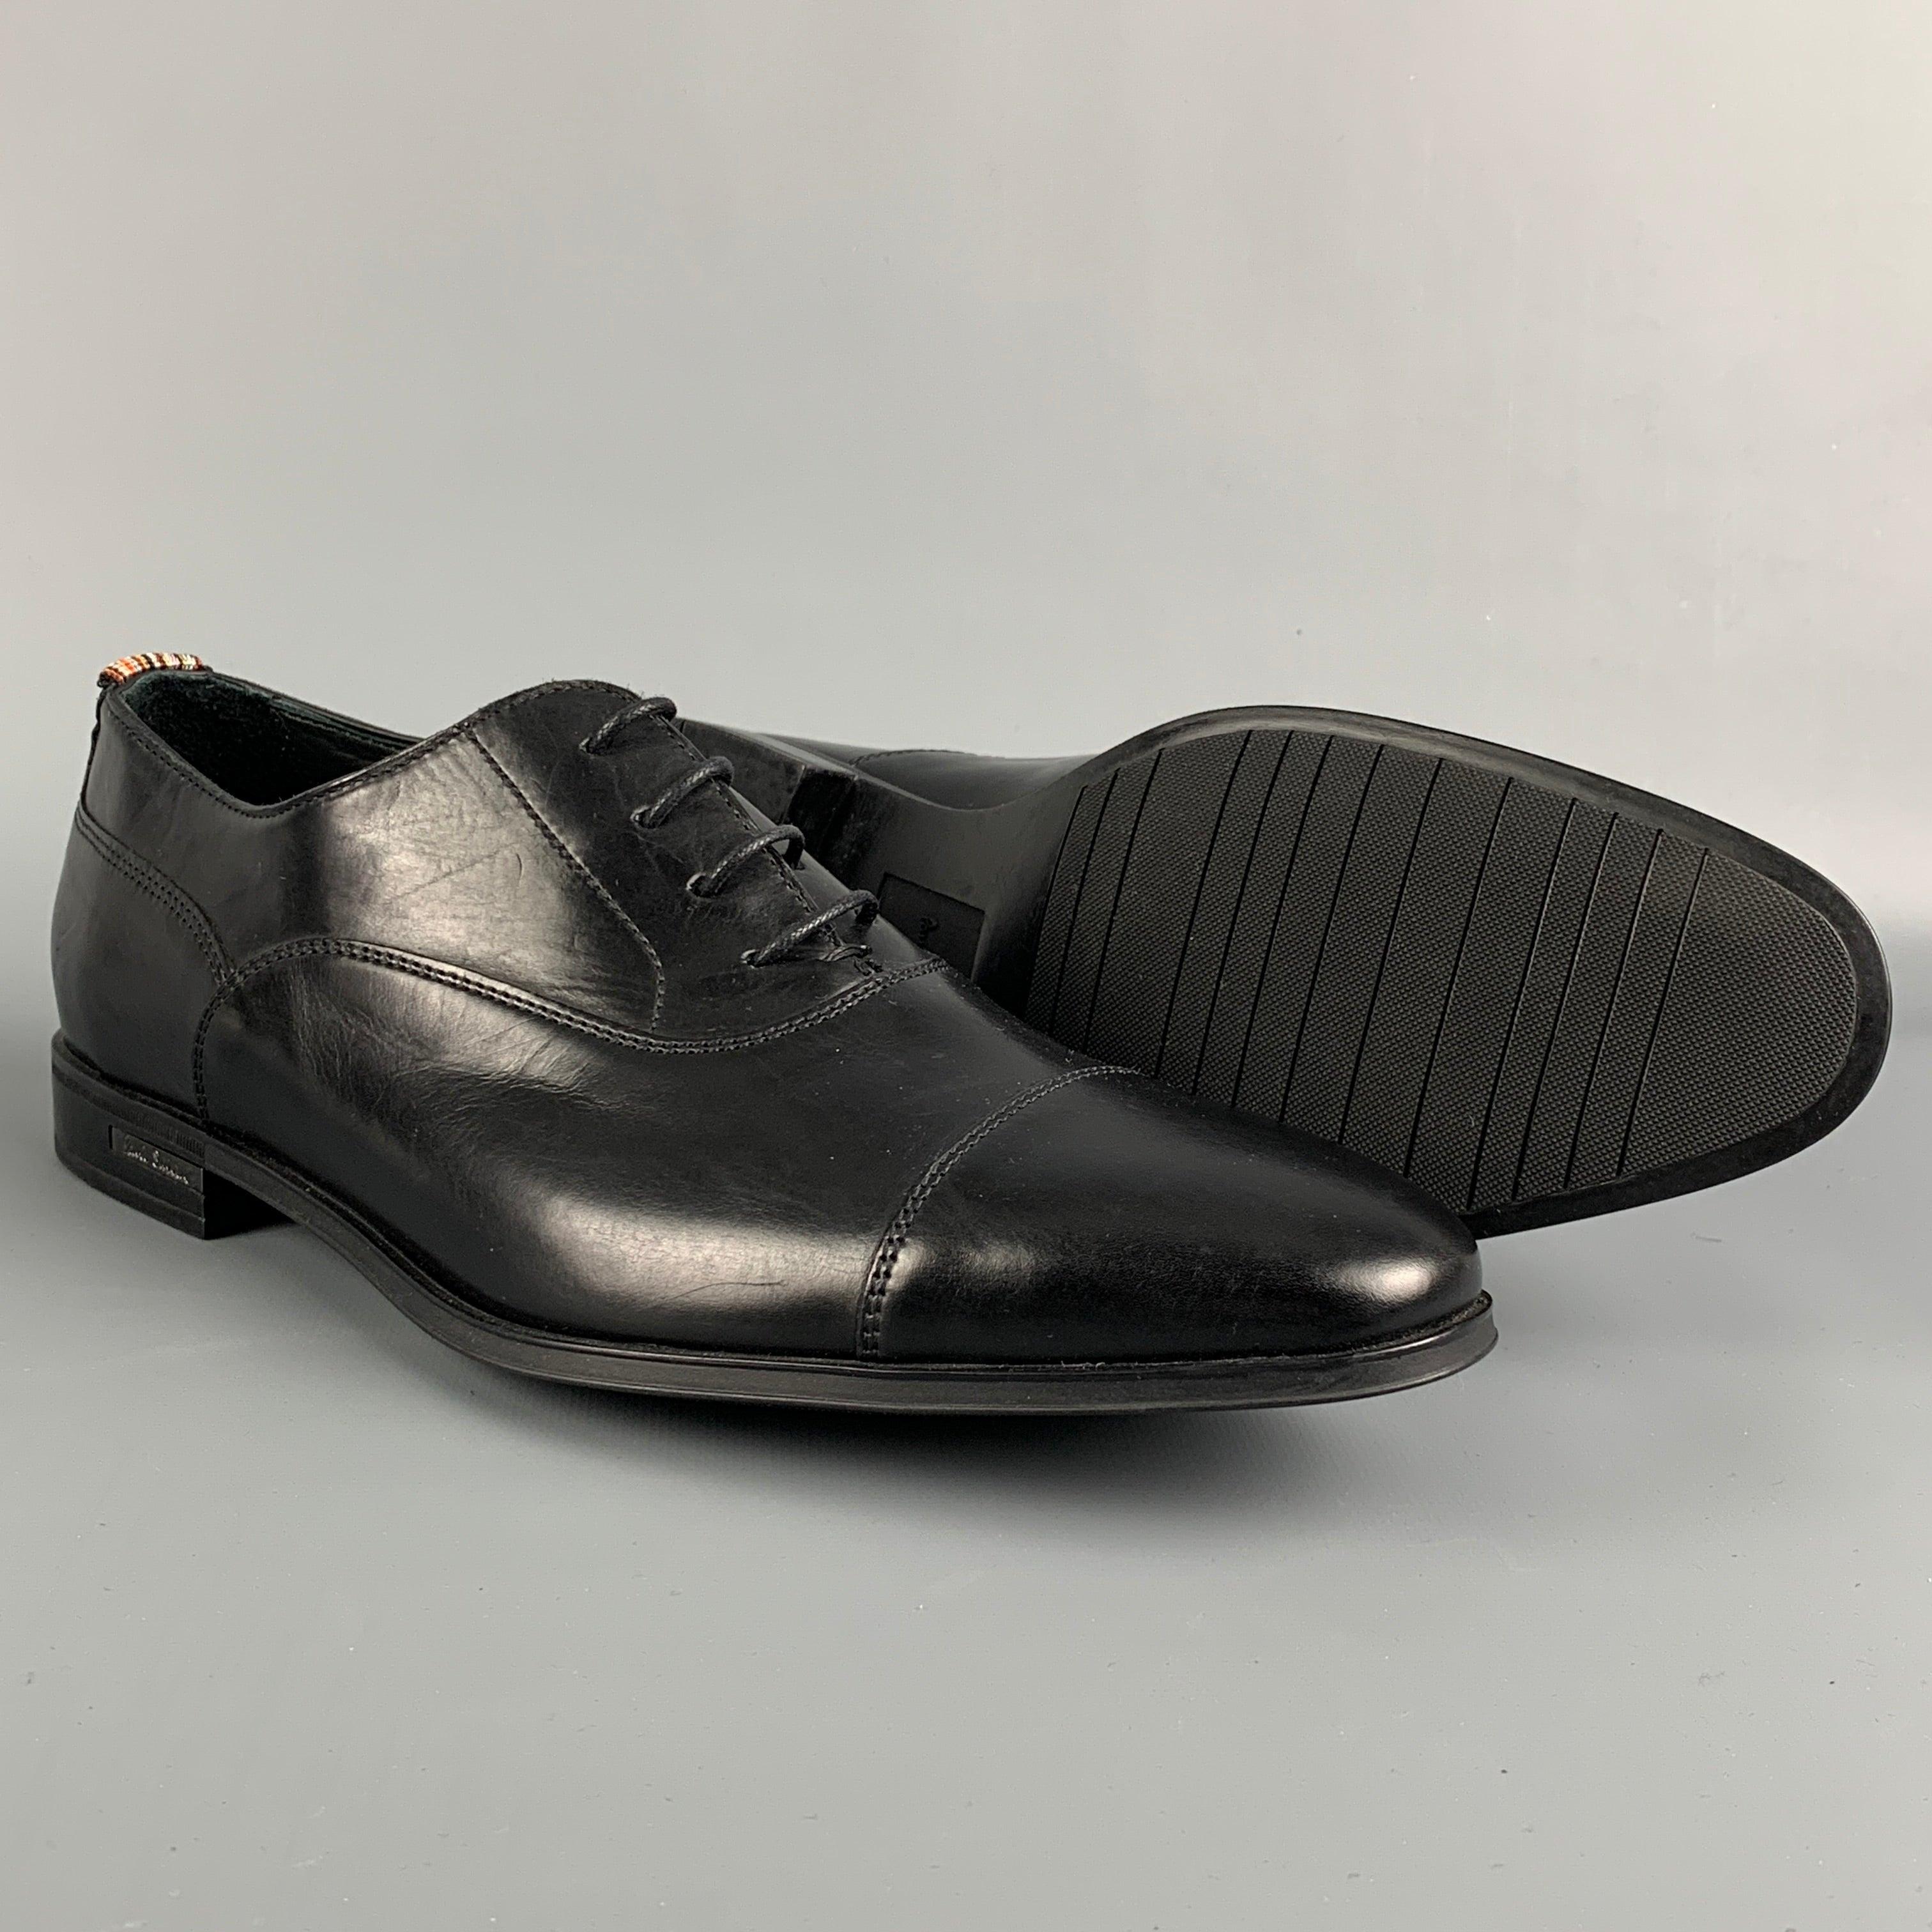 PAUL SMITH Size 8 Black Leather Lace Up Shoes In Good Condition For Sale In San Francisco, CA